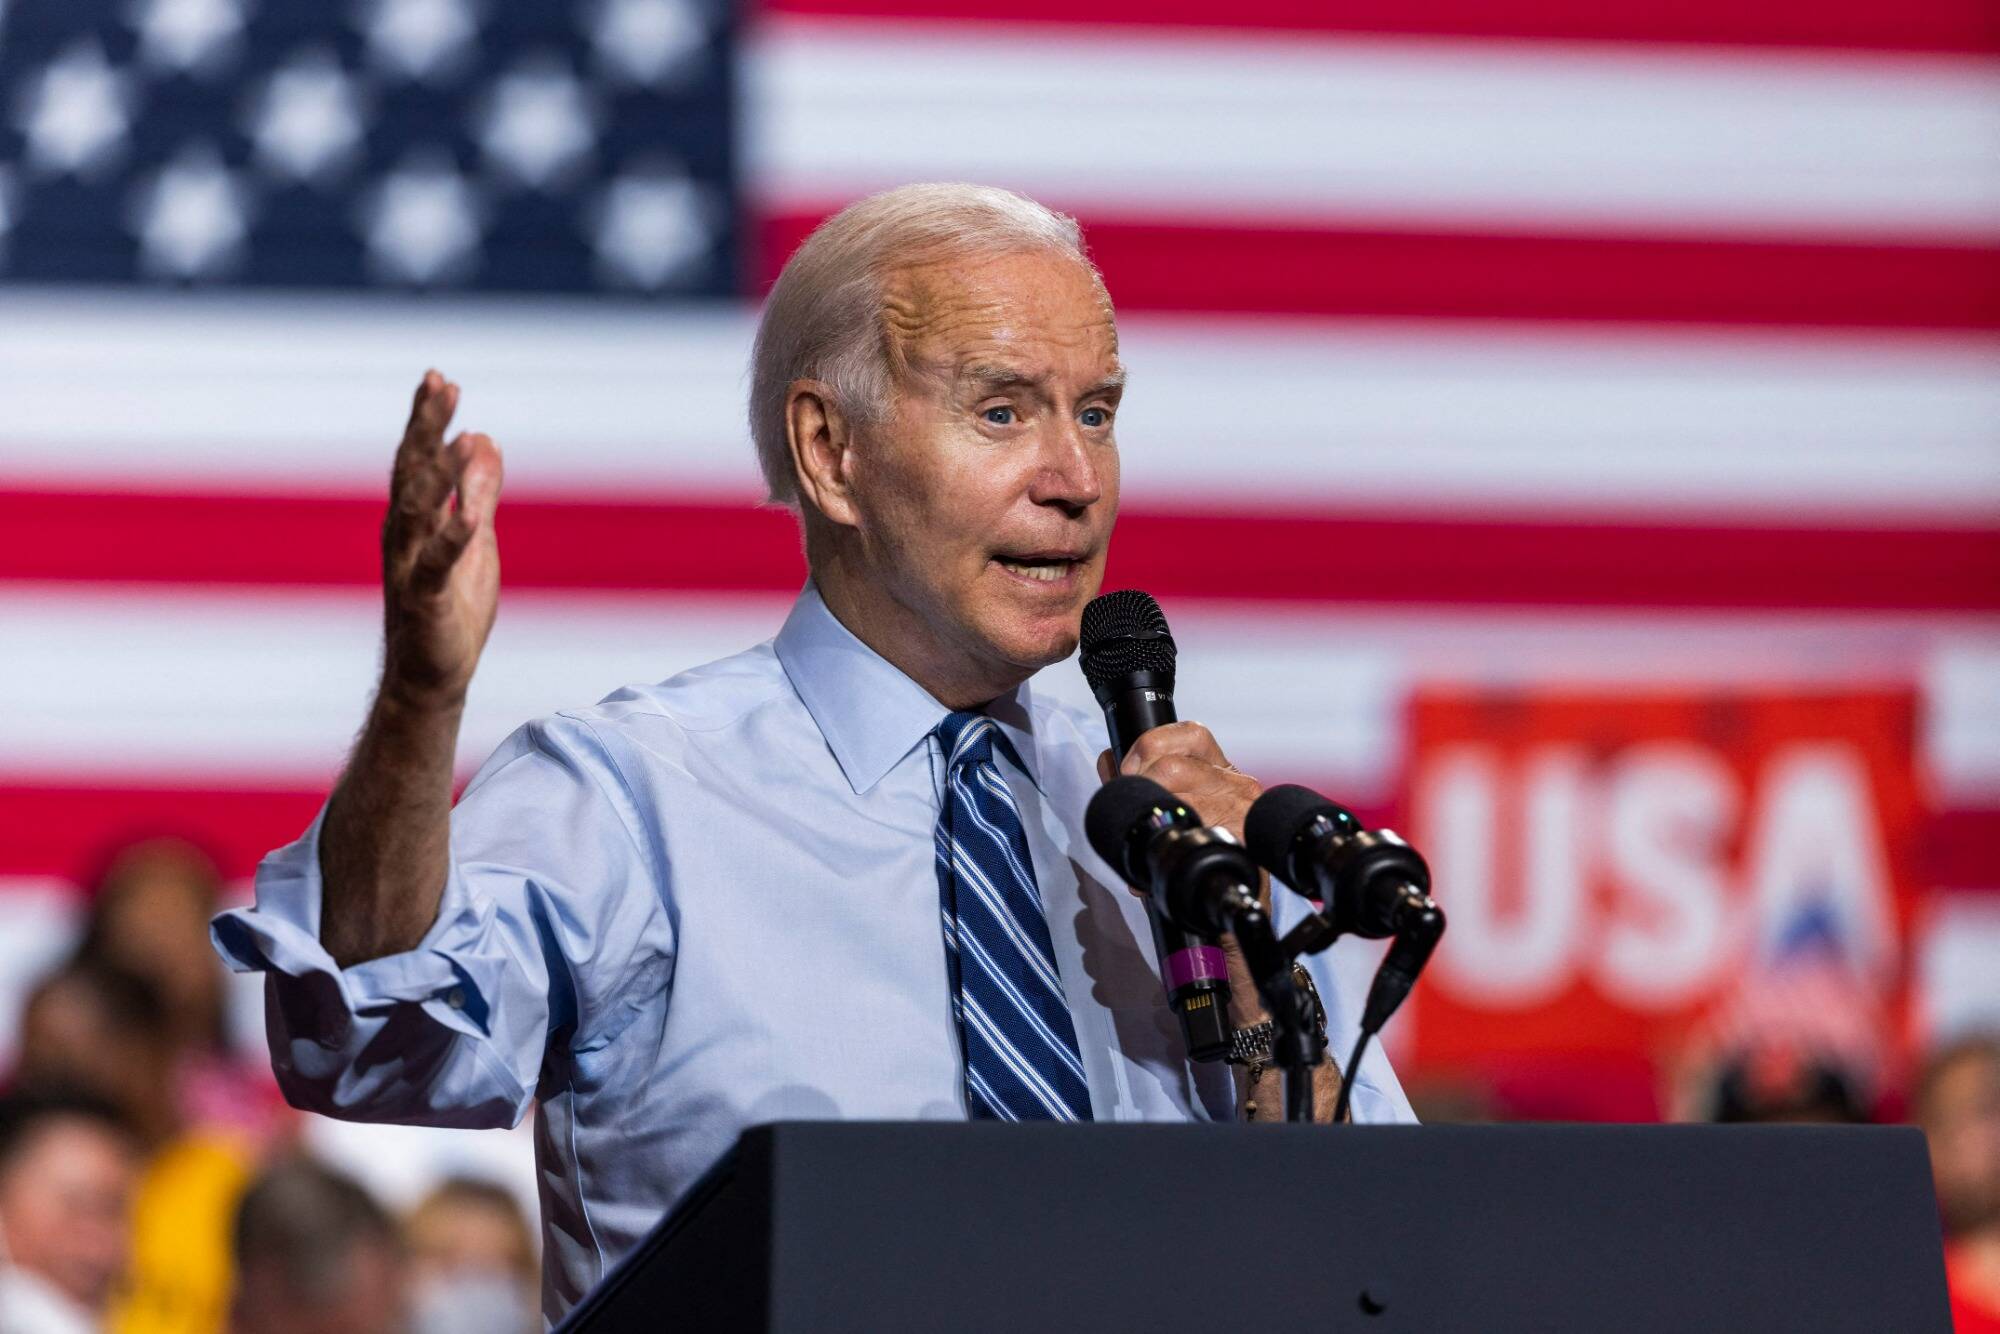 Confidential documents found in Biden’s private residence in Wilmington